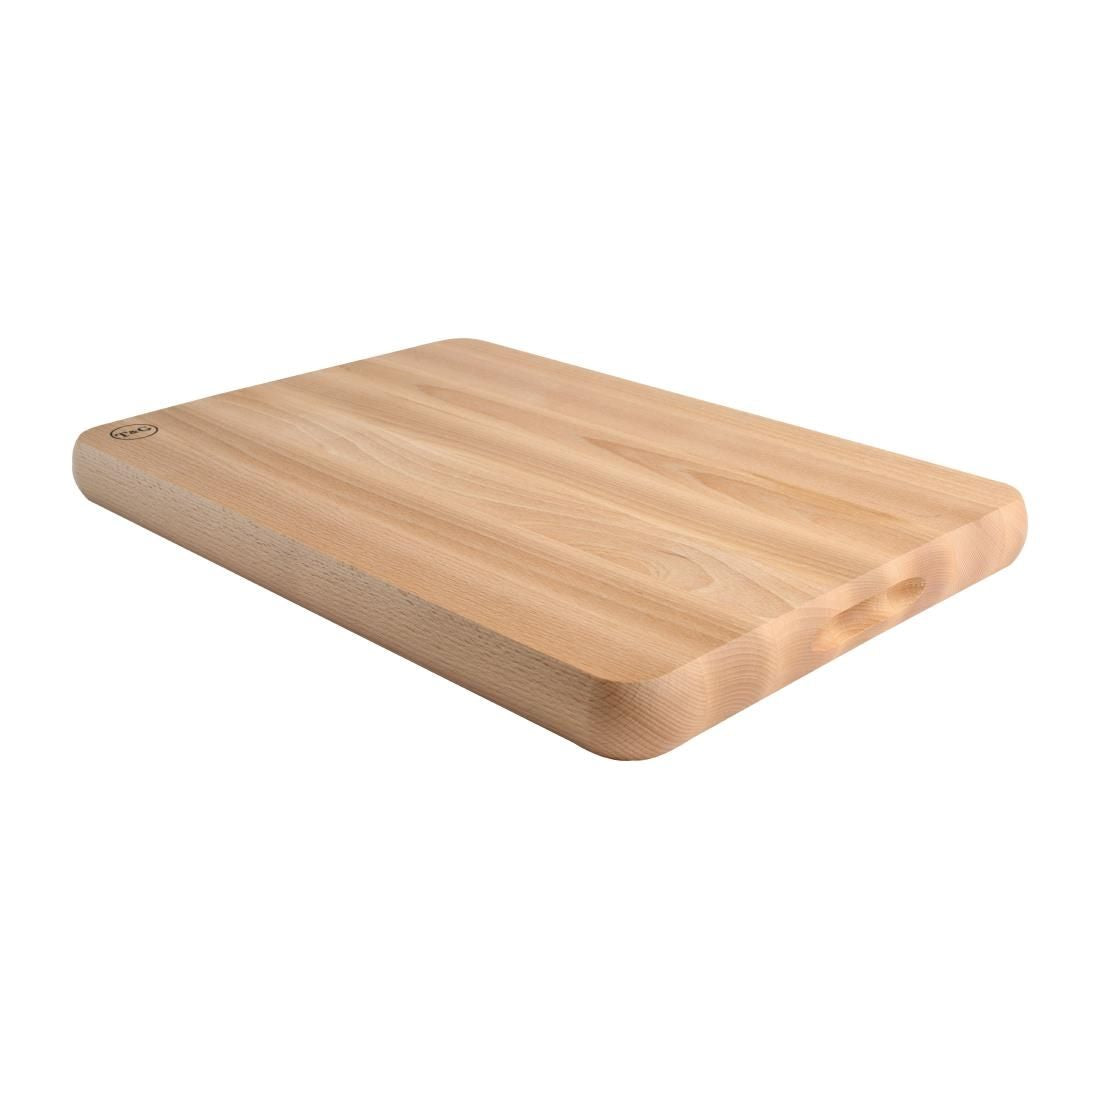 GJ514 T&G Beech Wood Chopping Board Large JD Catering Equipment Solutions Ltd